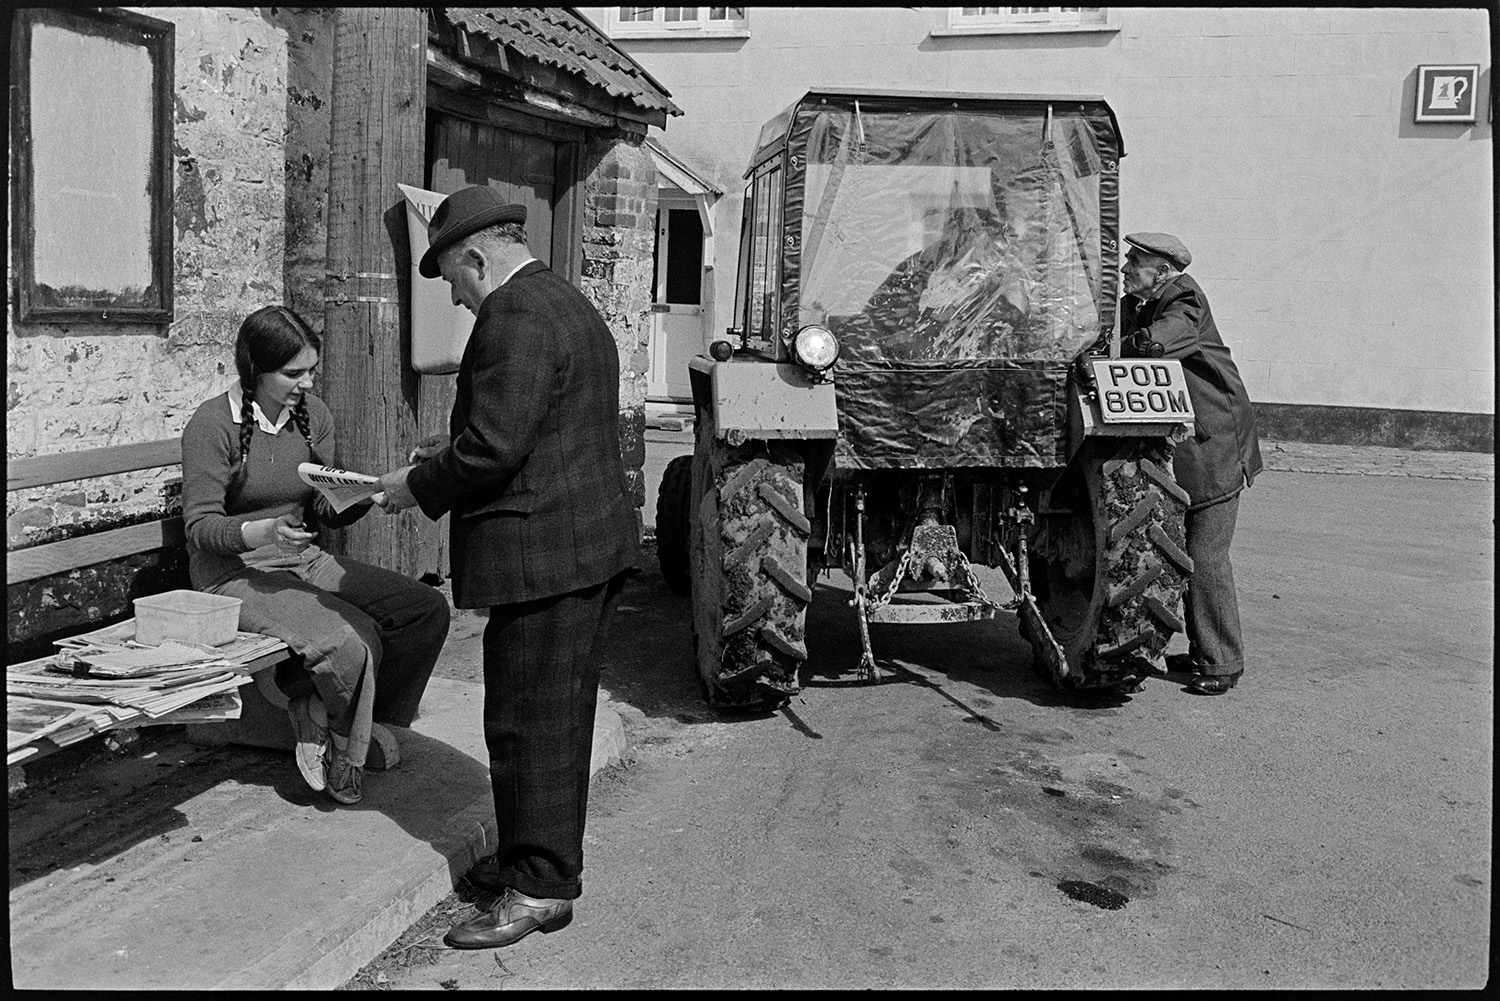 Sunday papers being sold in village, farmer in tractor and people chatting. 
[A girl selling a Sunday newspaper to a man in Kings Nympton. She is sat on a bench with the newspapers. In the background another man is talking to a person in a tractor.]